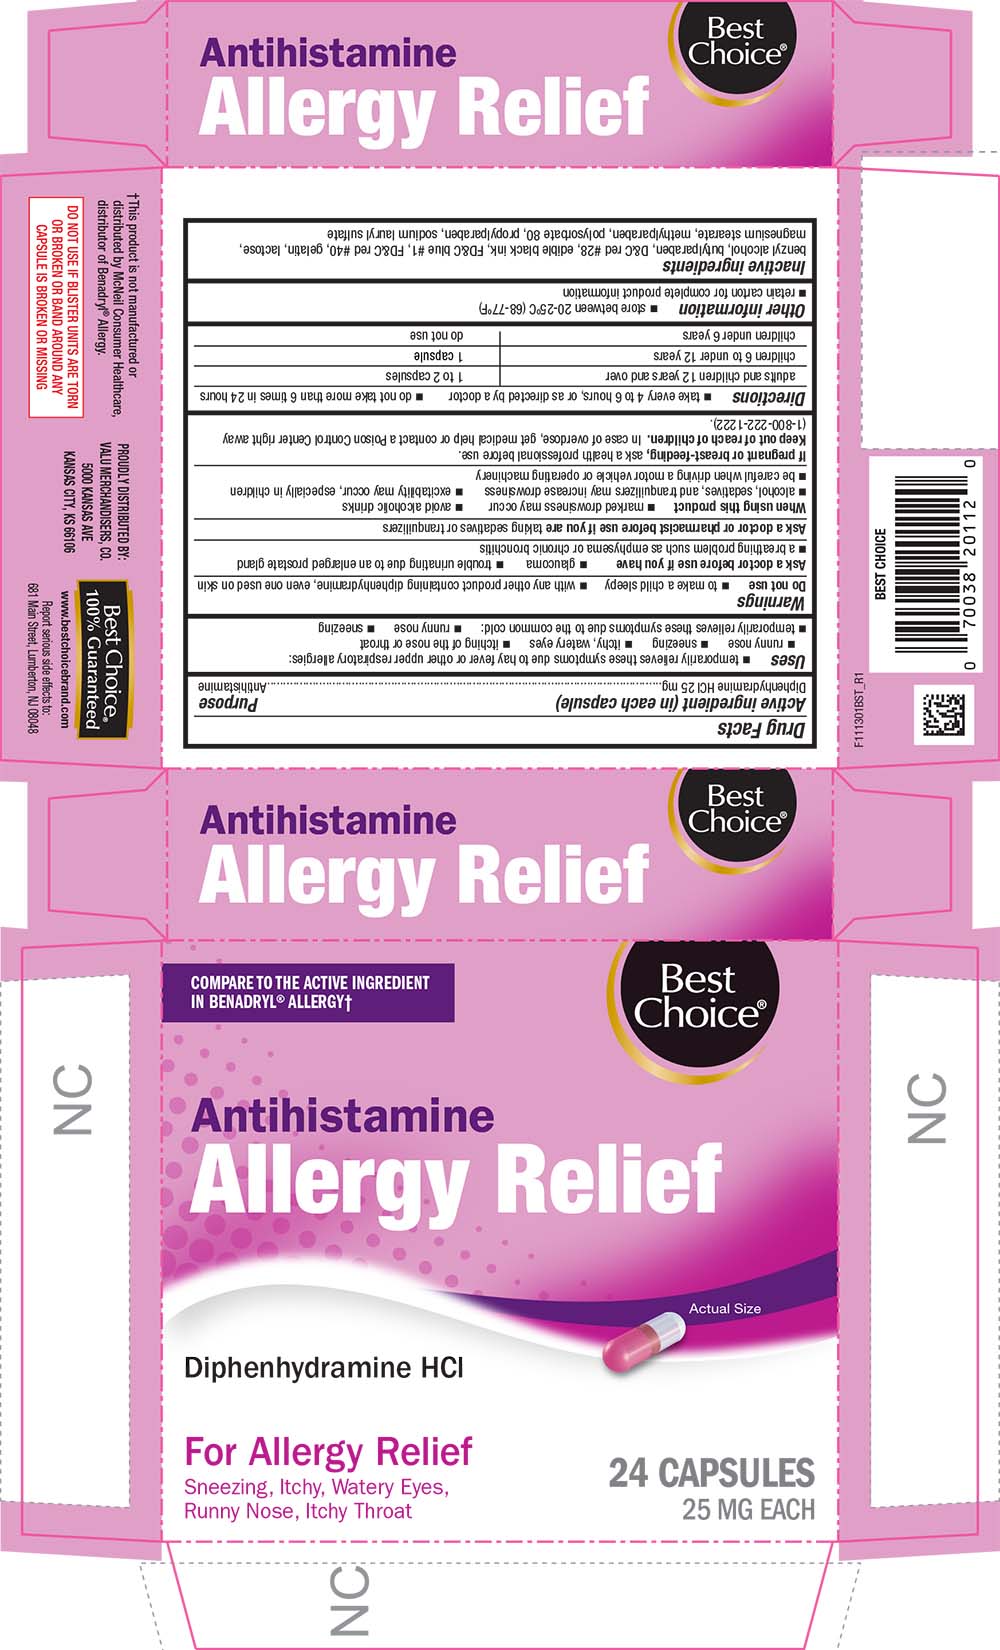 Product Images Allergy Relief Photos - Packaging, Labels & Appearance